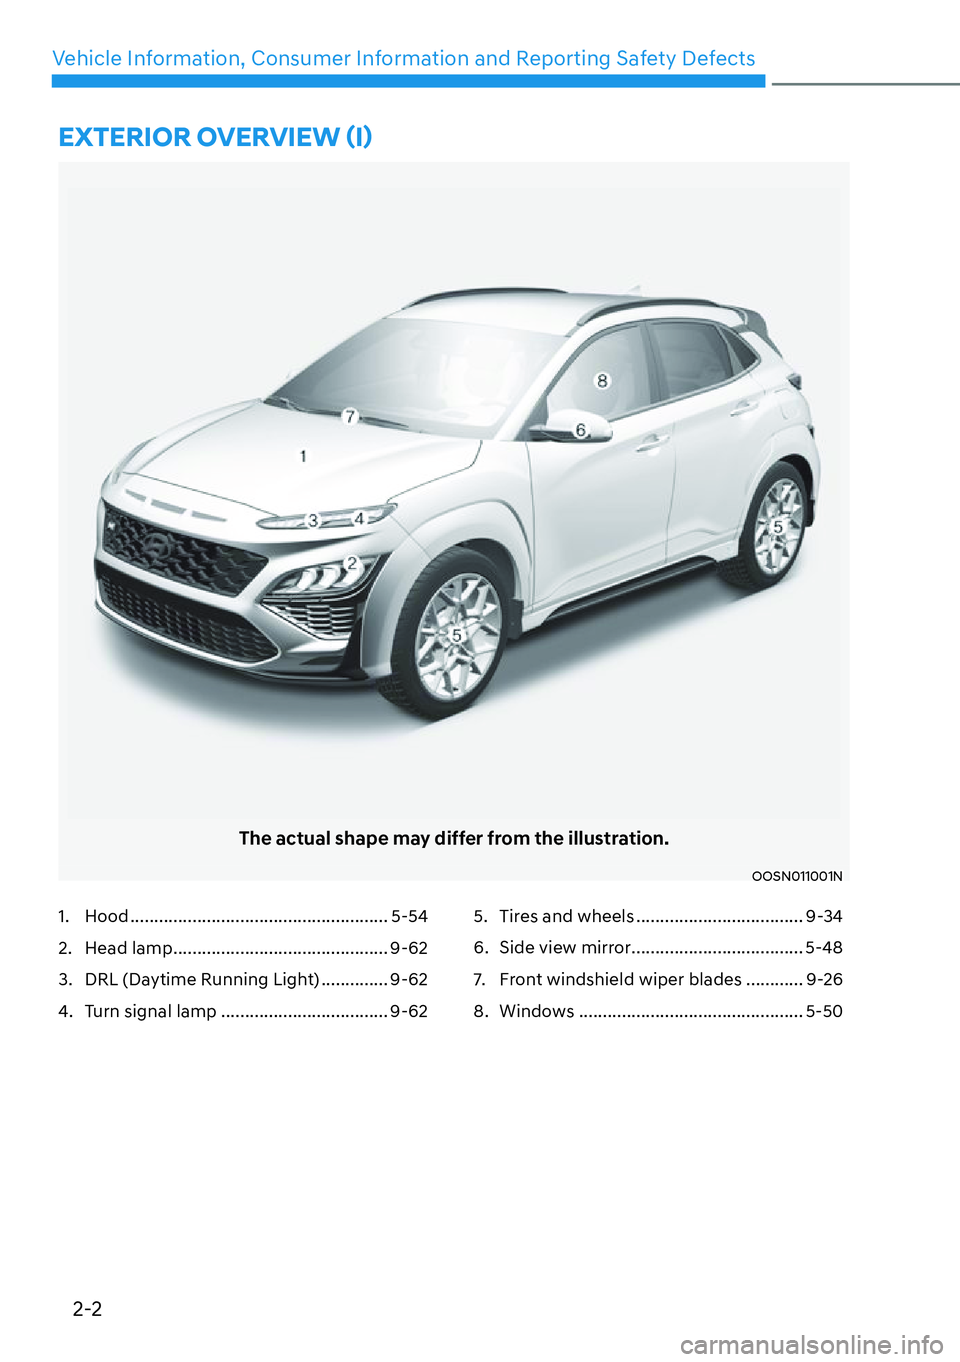 HYUNDAI KONA 2023  Owners Manual 2-2
Vehicle Information, Consumer Information and Reporting Safety Defects
�(�;�7�(�5�,�2�5��2�9�(�5�9�,�(�:�